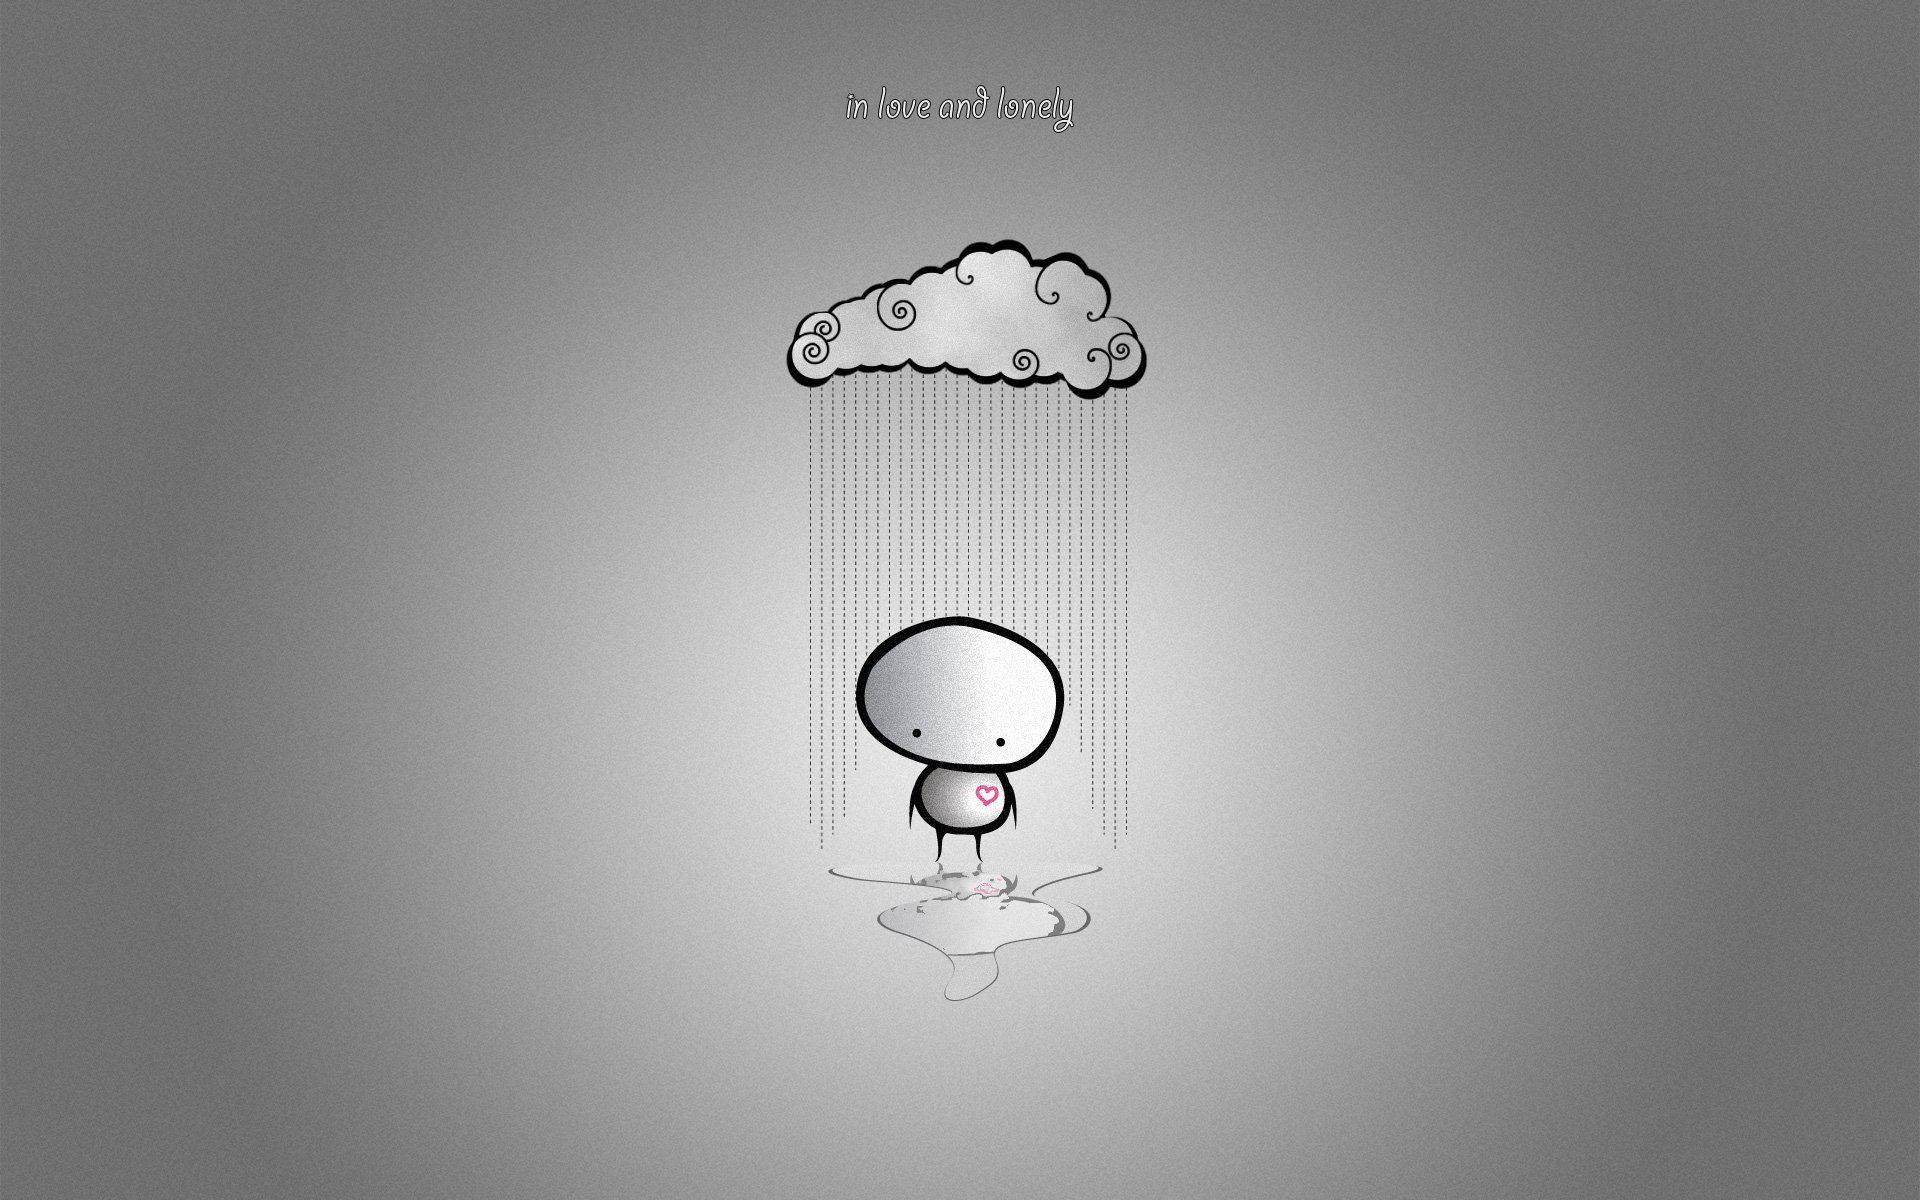 Download Sad Cartoon In Love And Lonely Wallpaper 